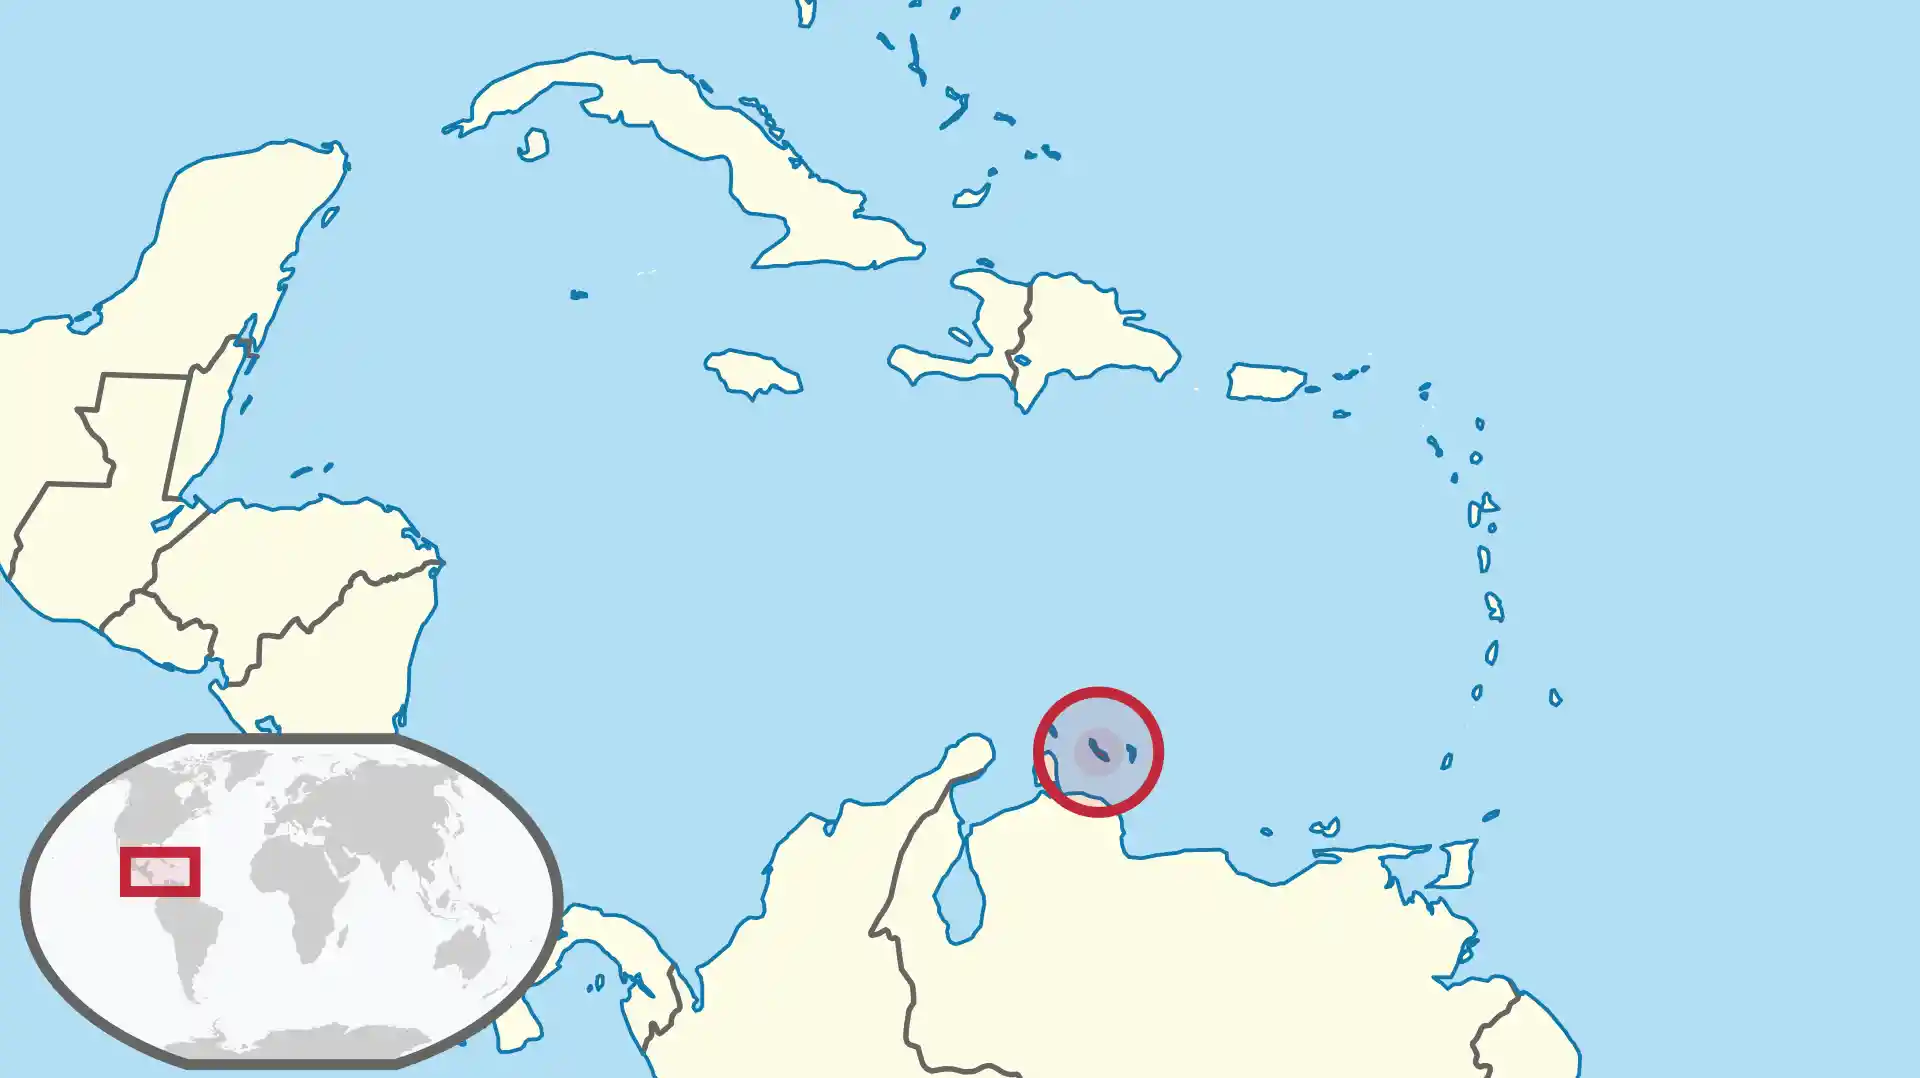 1920px-Curacao_in_its_region.svg.png